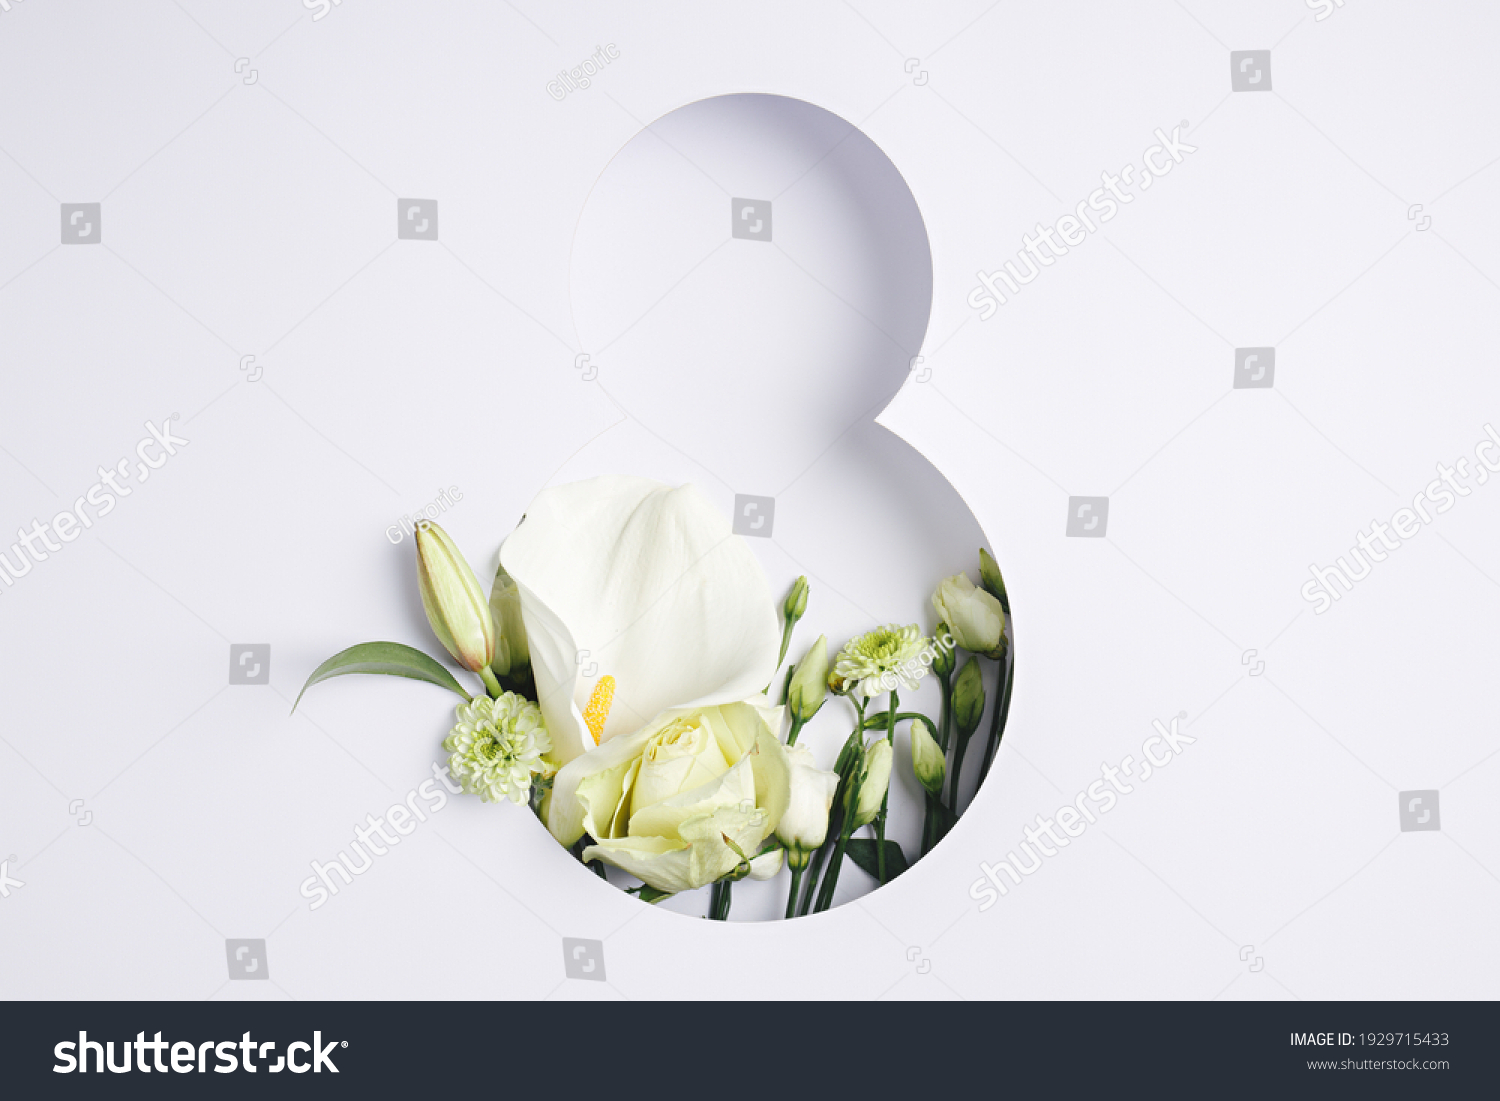 Number 8 with fresh gerbera, calla and rose flowers with green leaves on bright white background. Minimal Women's day, March 8th or birthday concept. Flat lay, top view. #1929715433